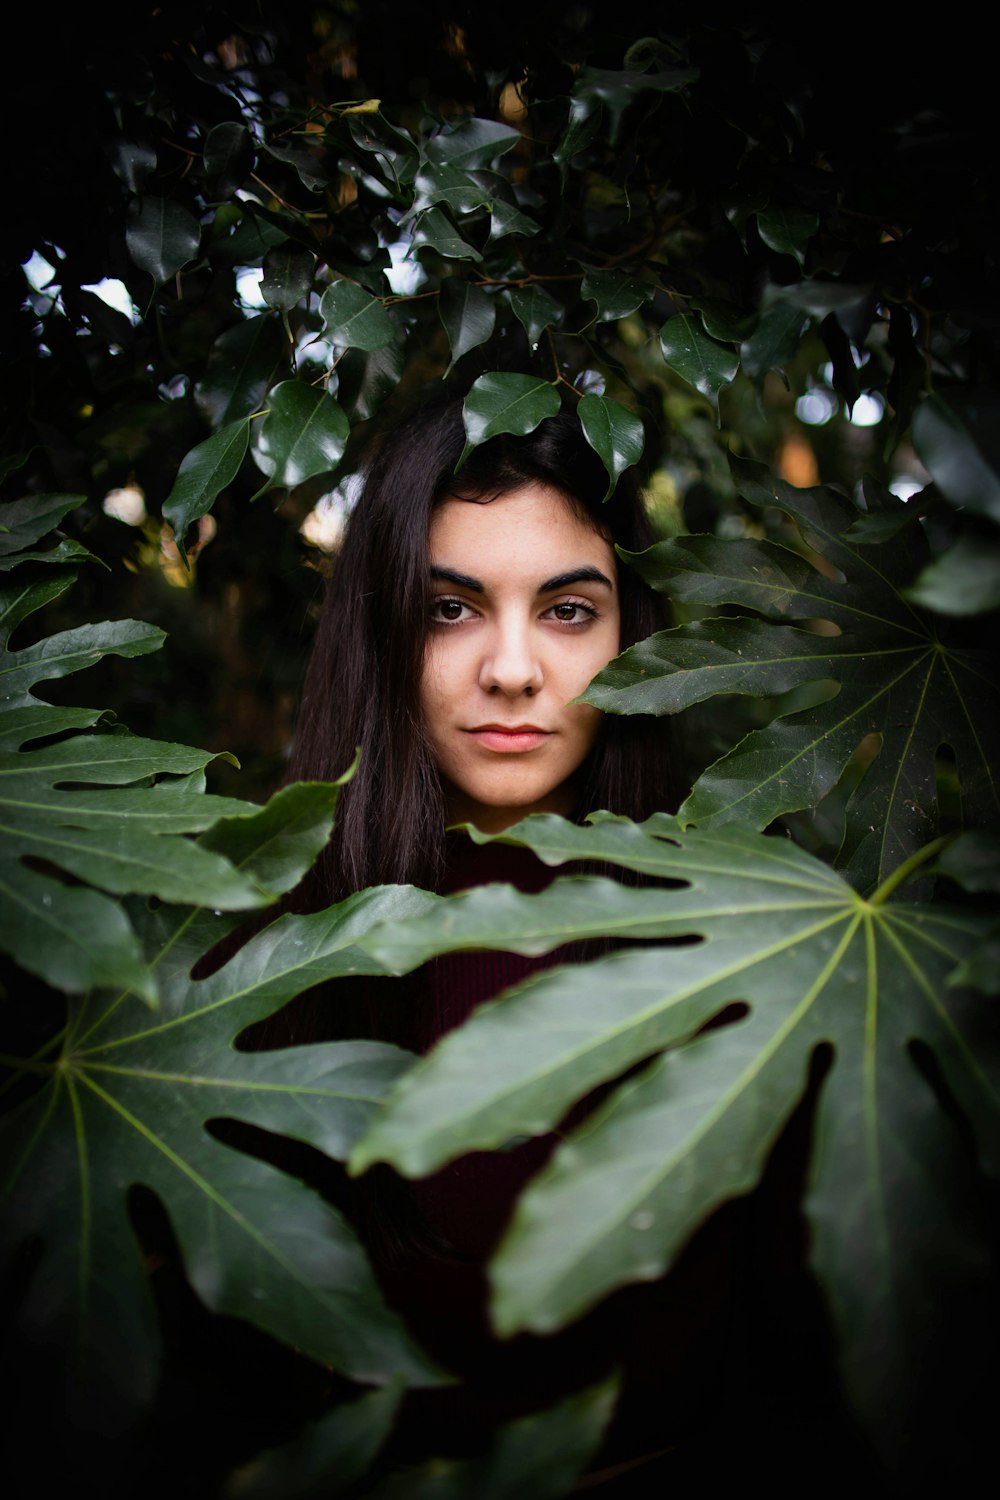 portrait photography of woman surrounded by green leafed plants